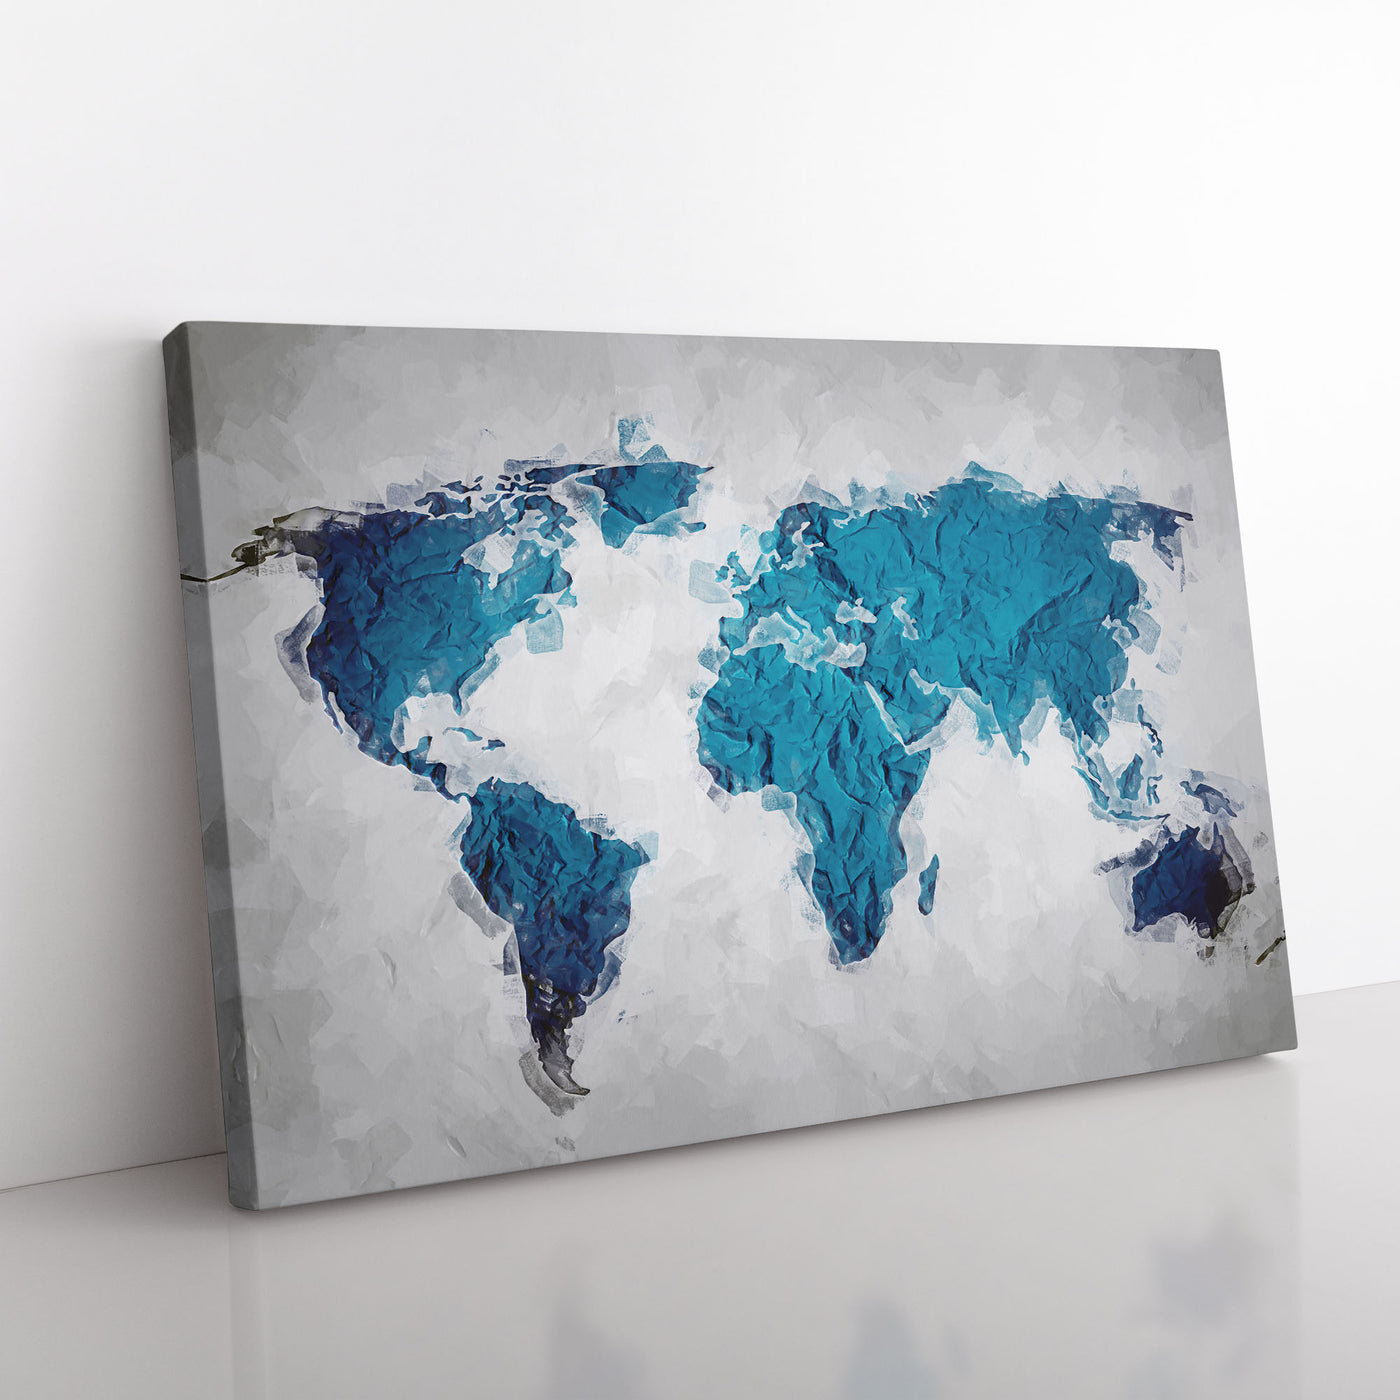 Teal Blue Map Of The World